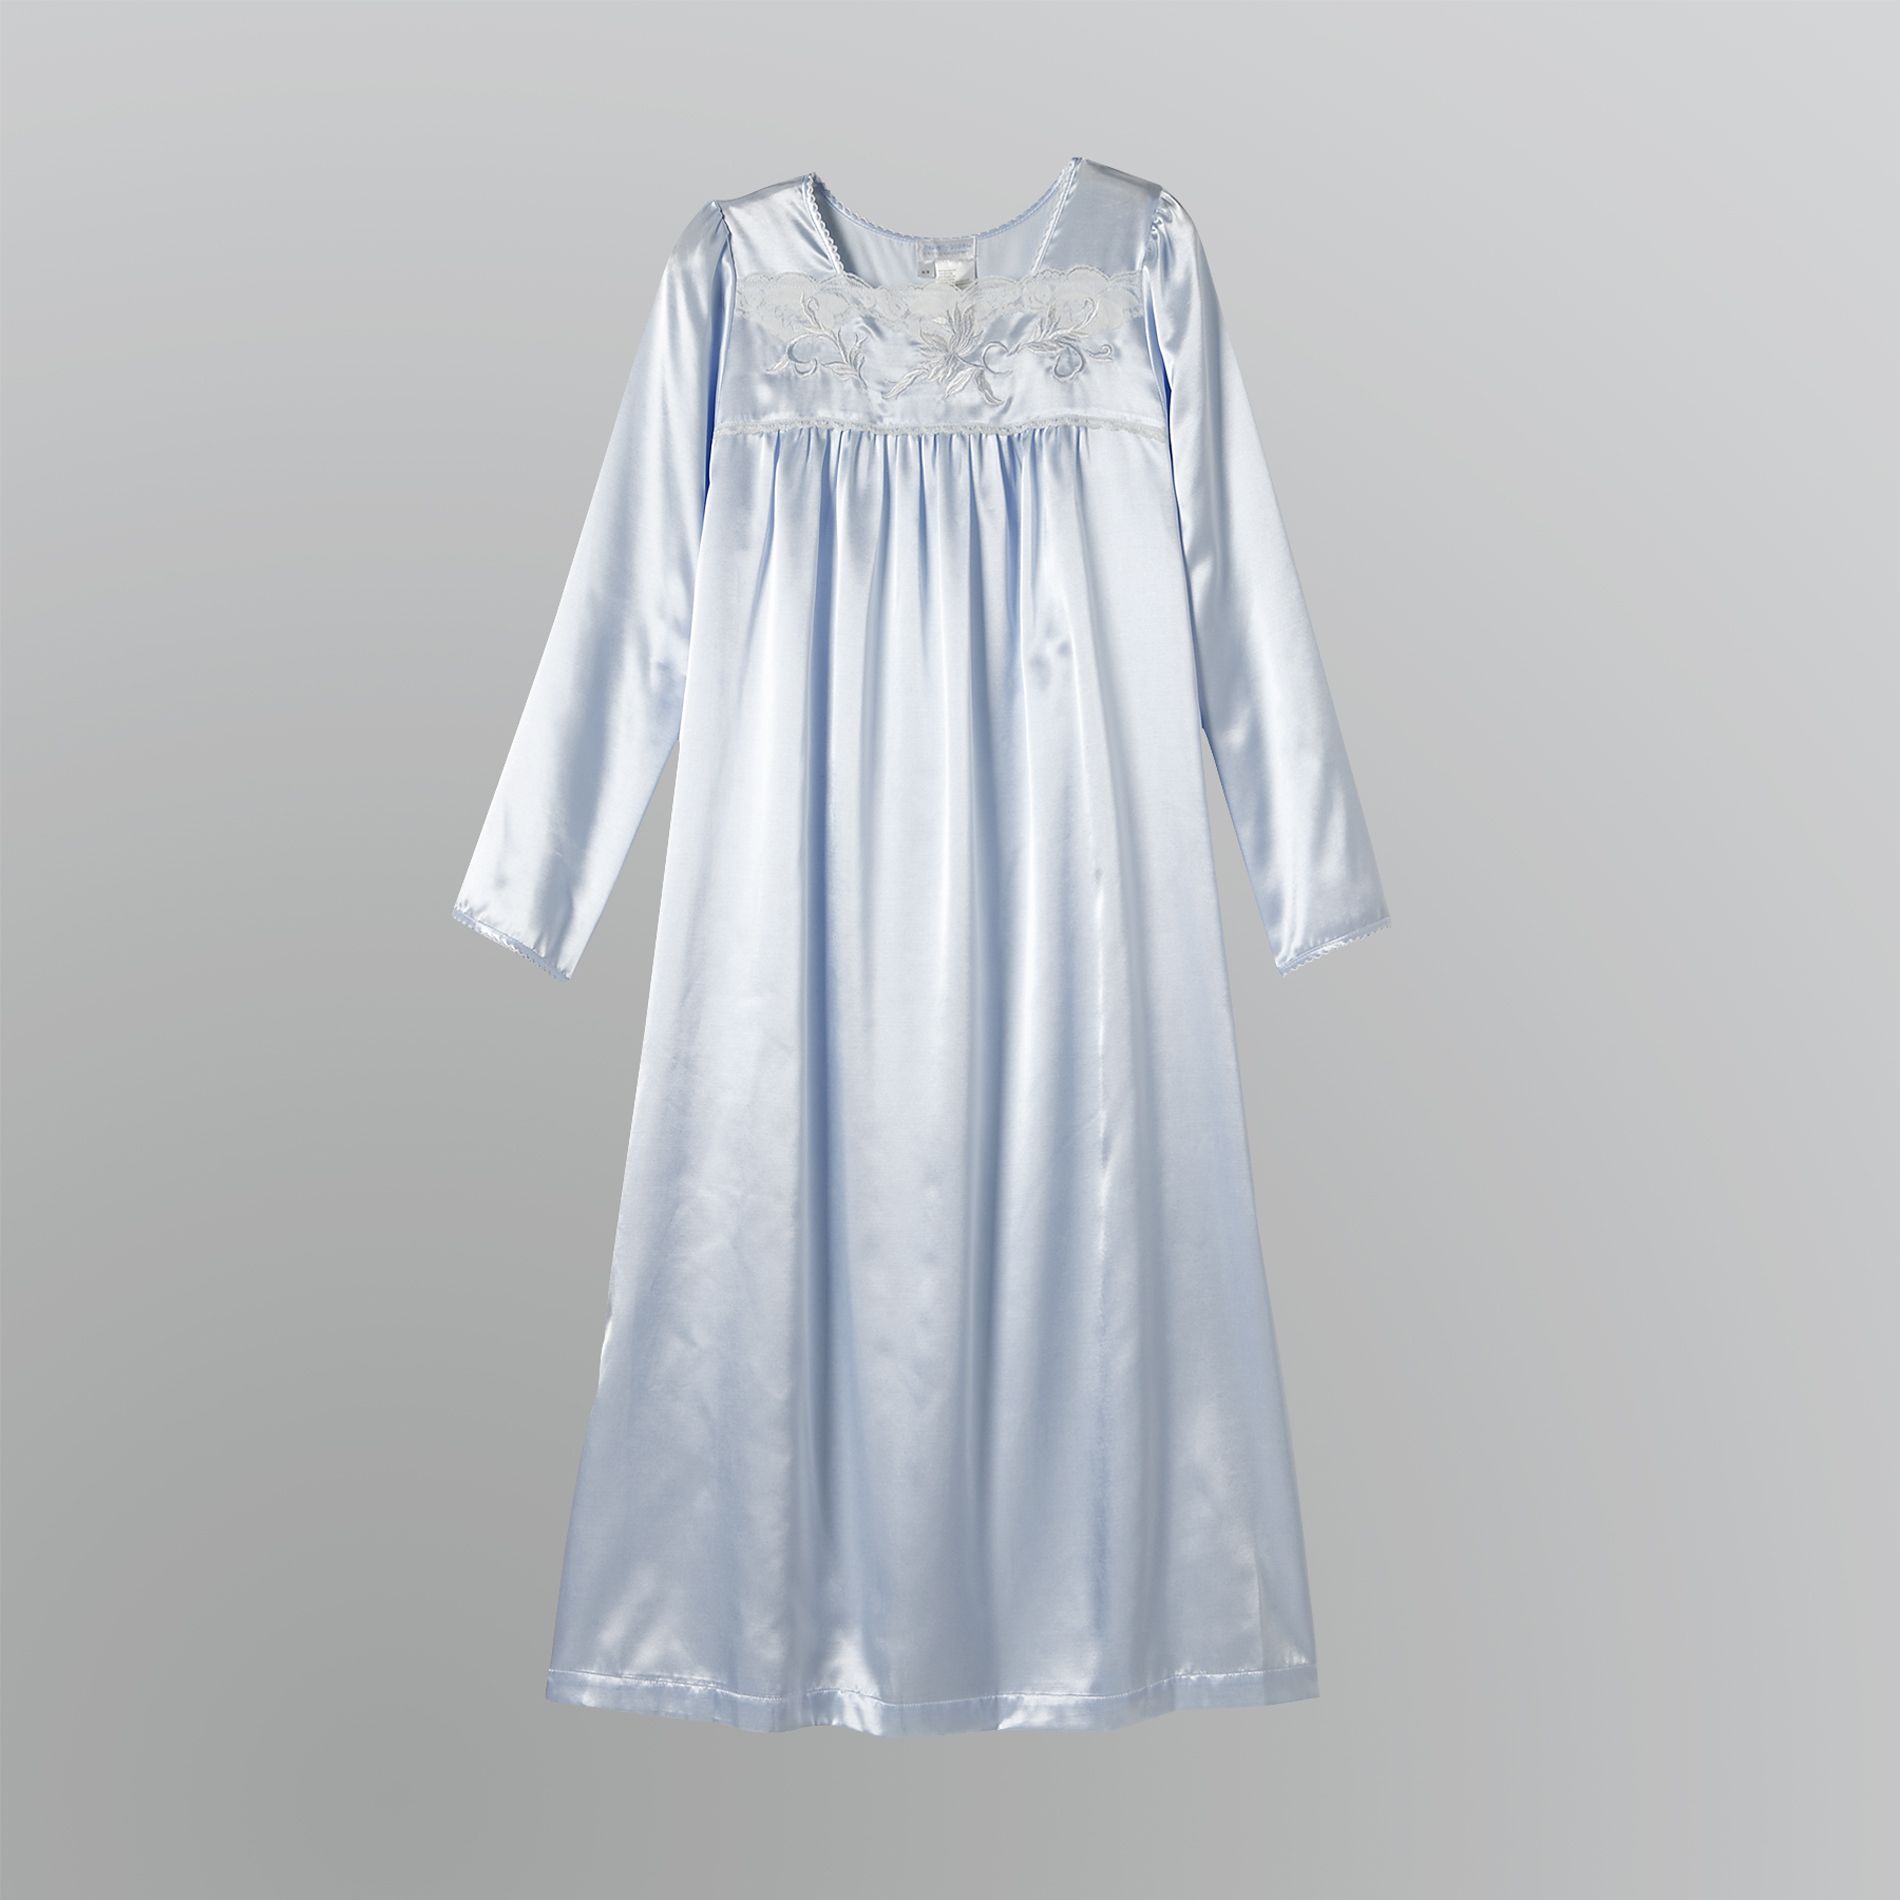 Heavenly Bodies by Miss Elaine Women's Lace-Detail Nightgown